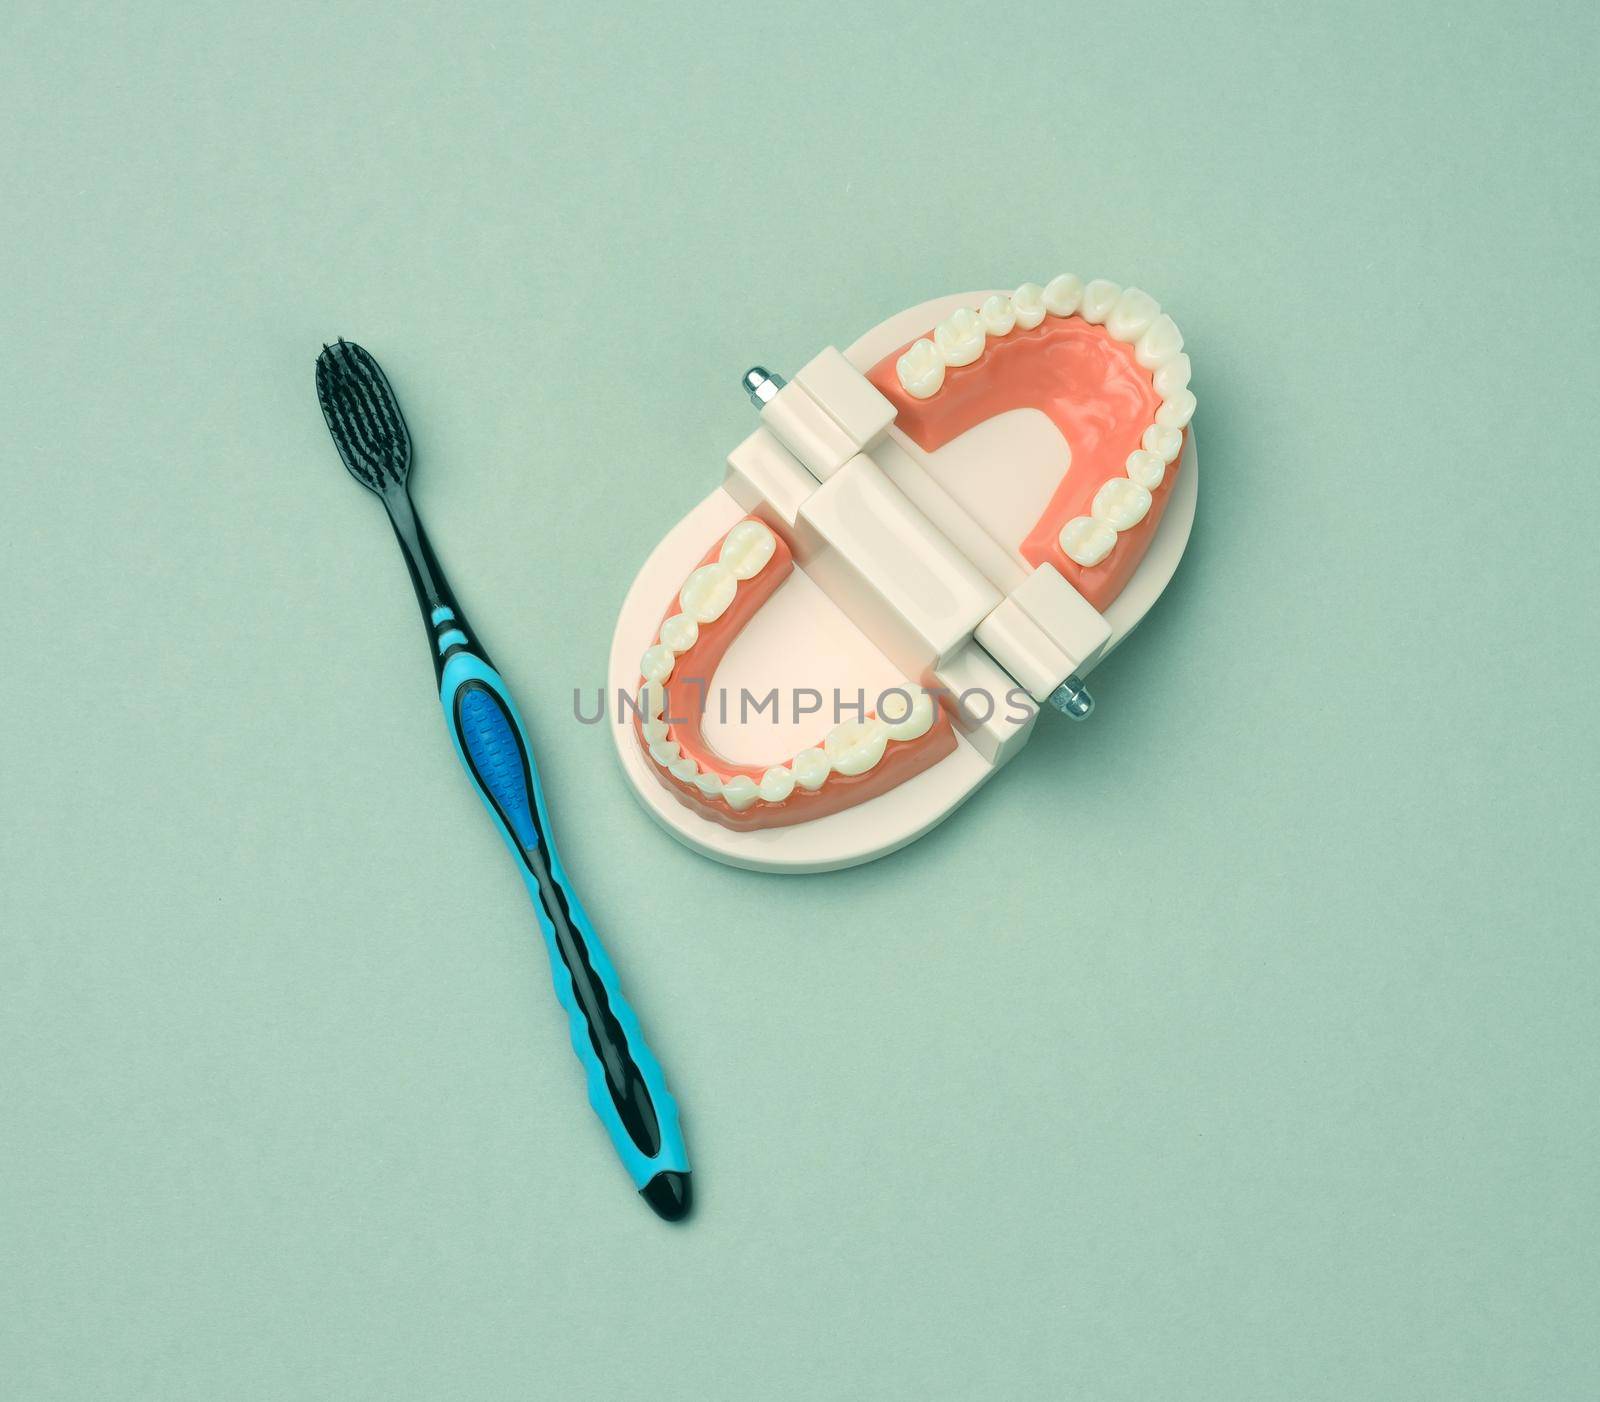 plastic model of a human jaw with white teeth and toothbrush on a green background by ndanko